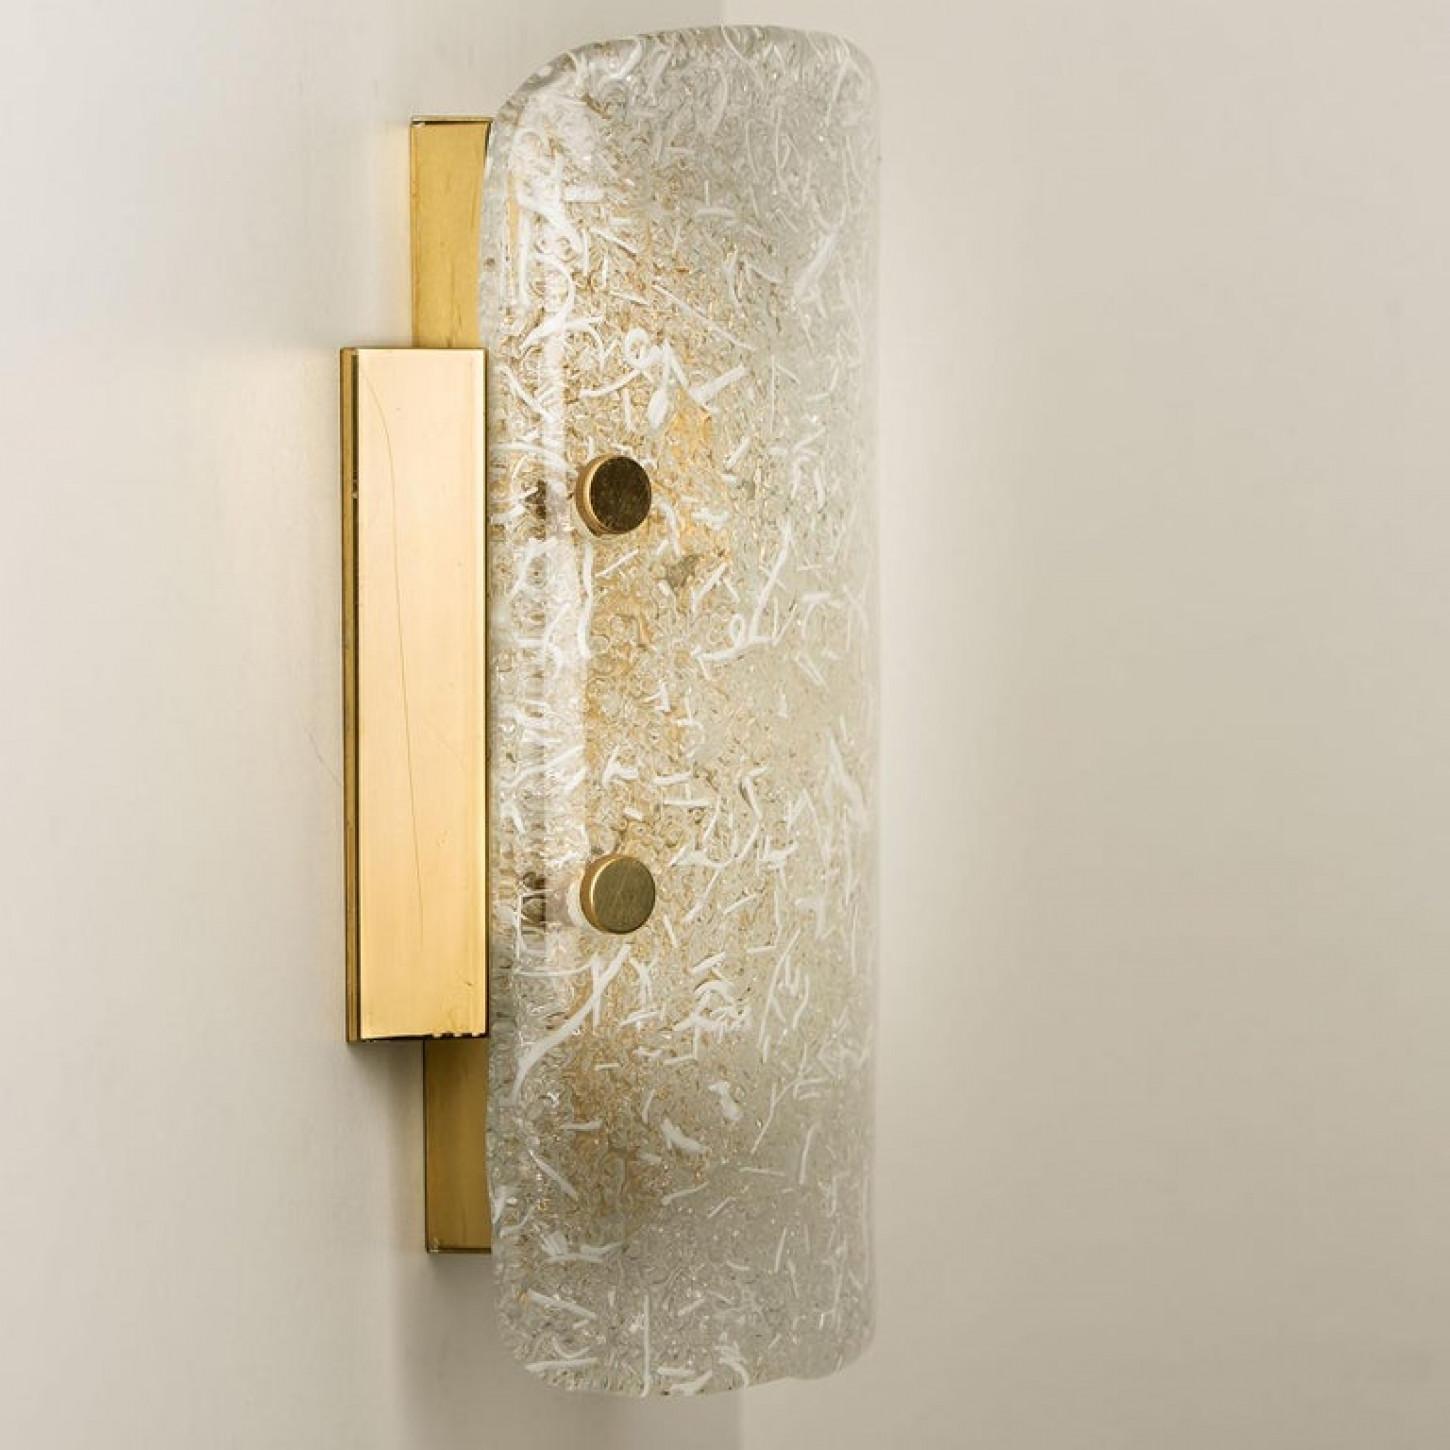 Pair of Glass Brass Wall Sconces by Hillebrand, Austria, 1960 For Sale 1